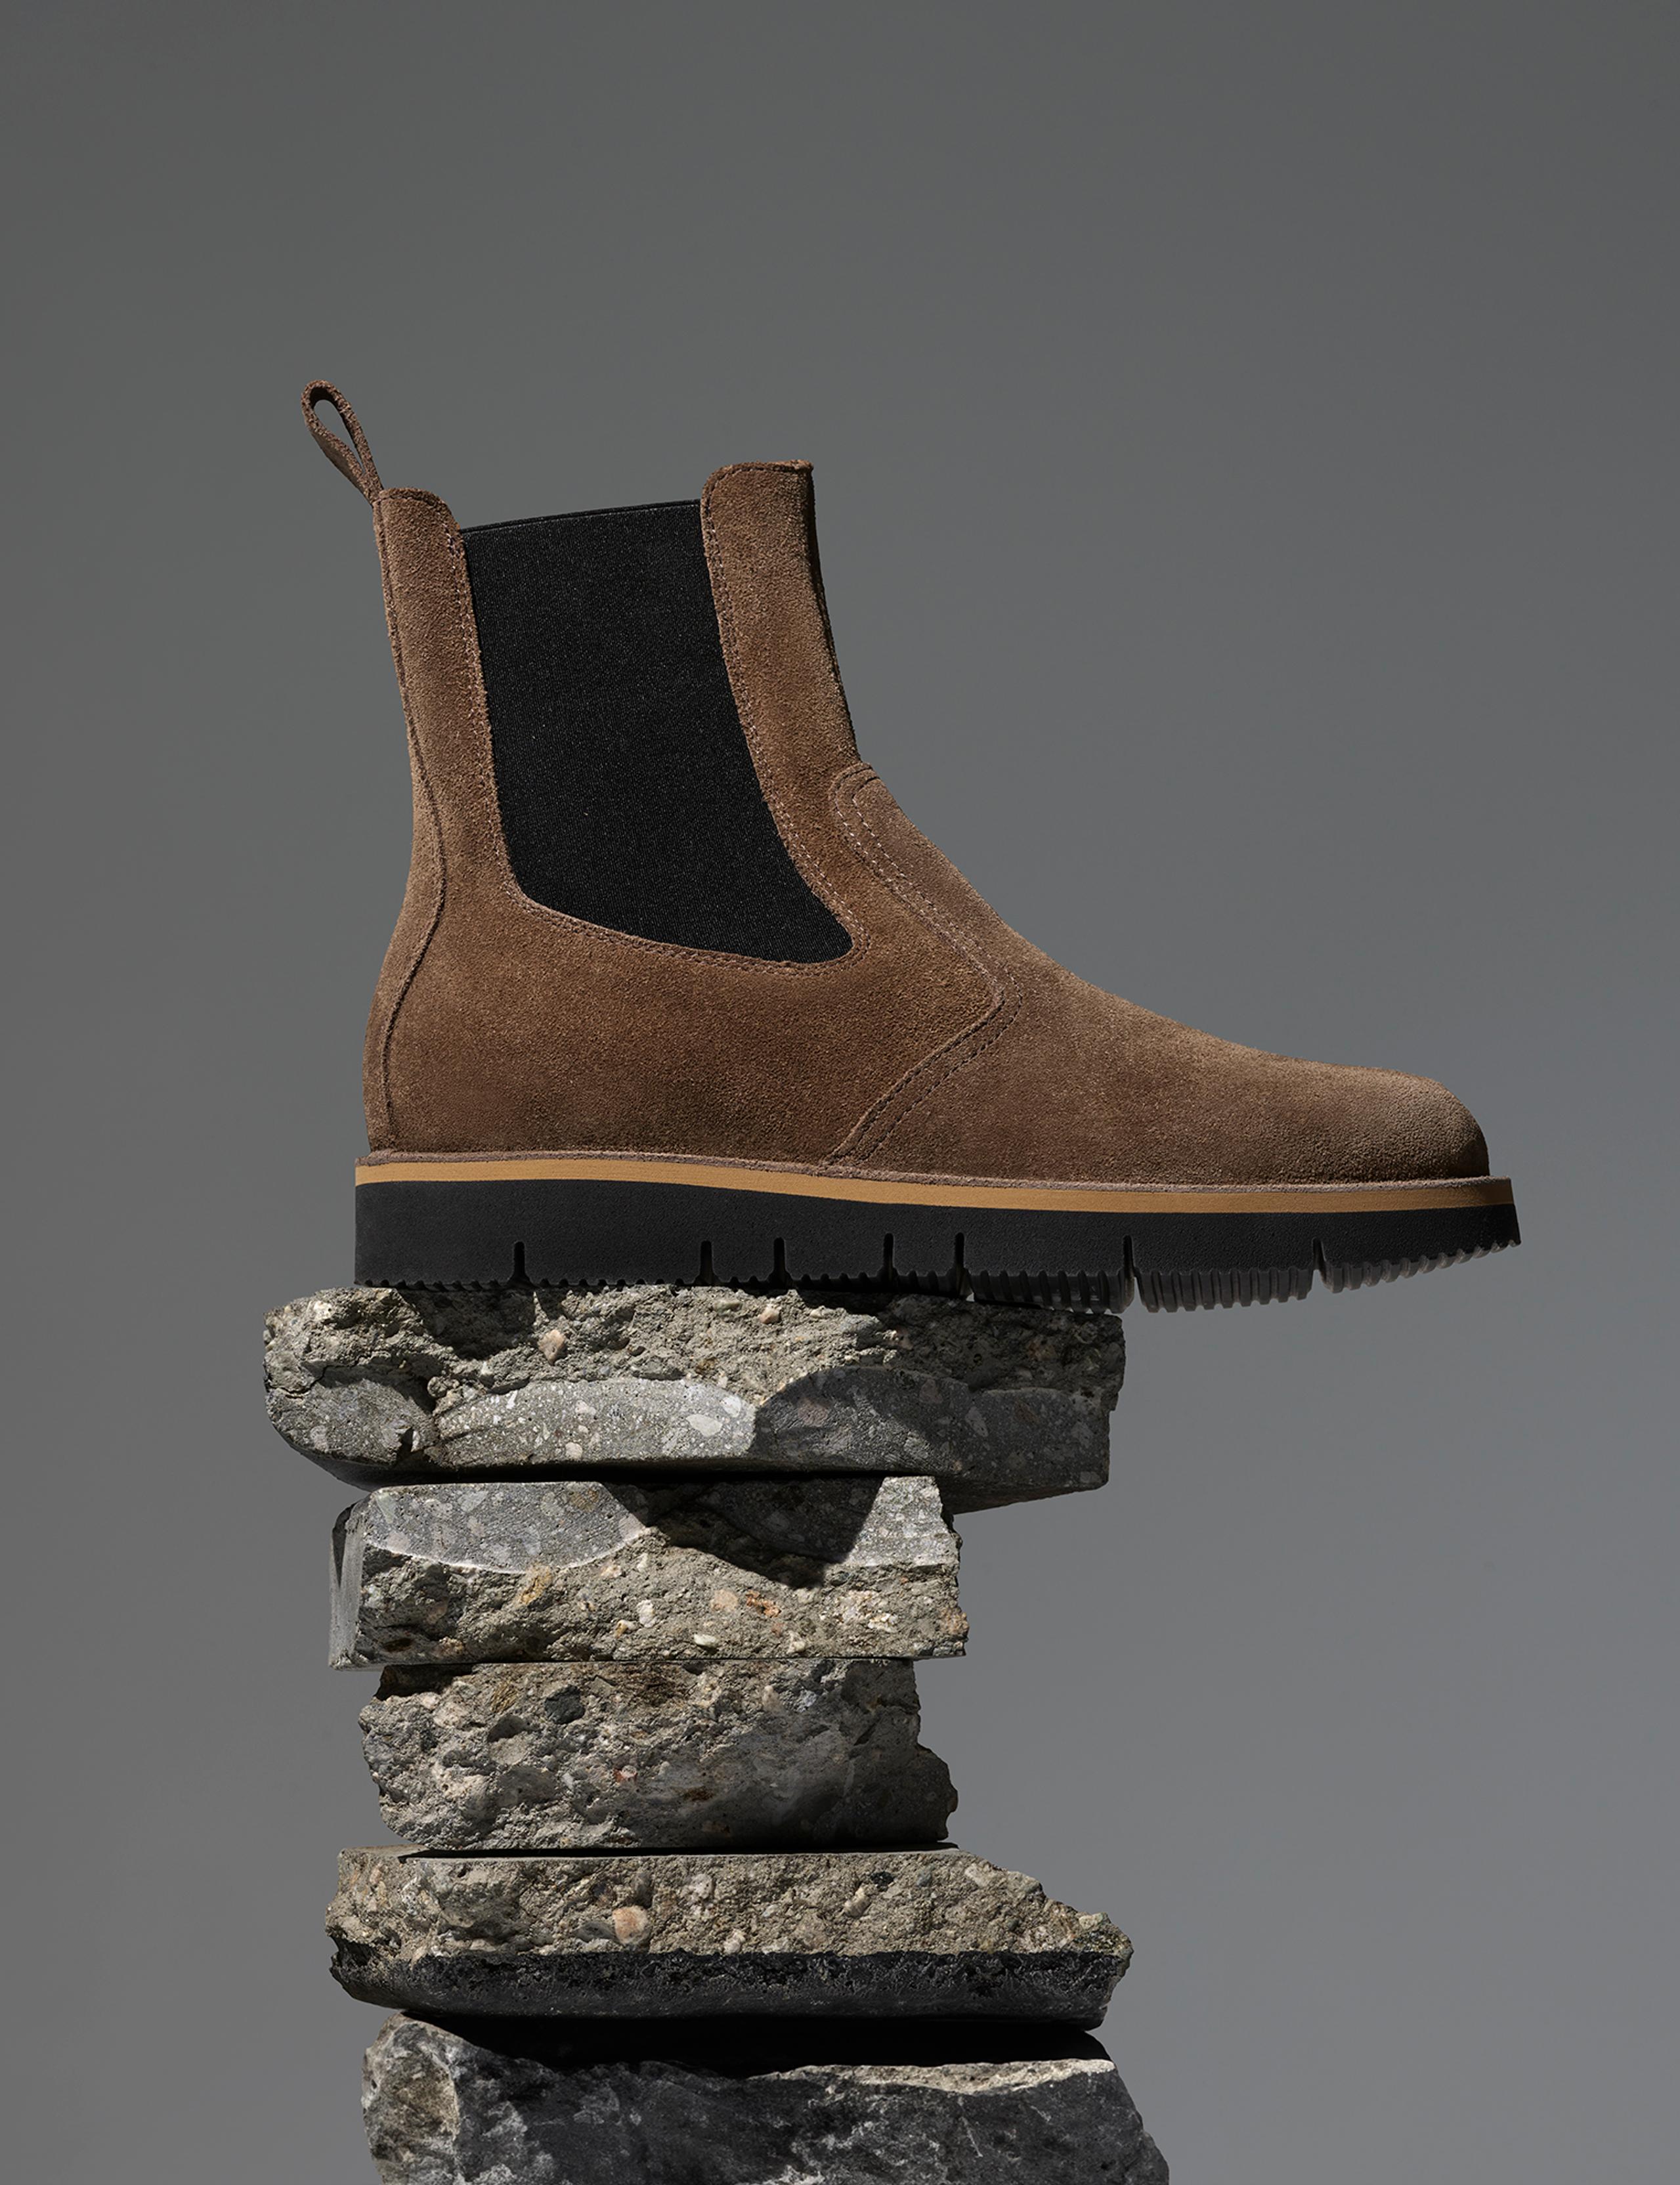 Studio photo of AETHER Chelsea Boot sitting on stack of rocks